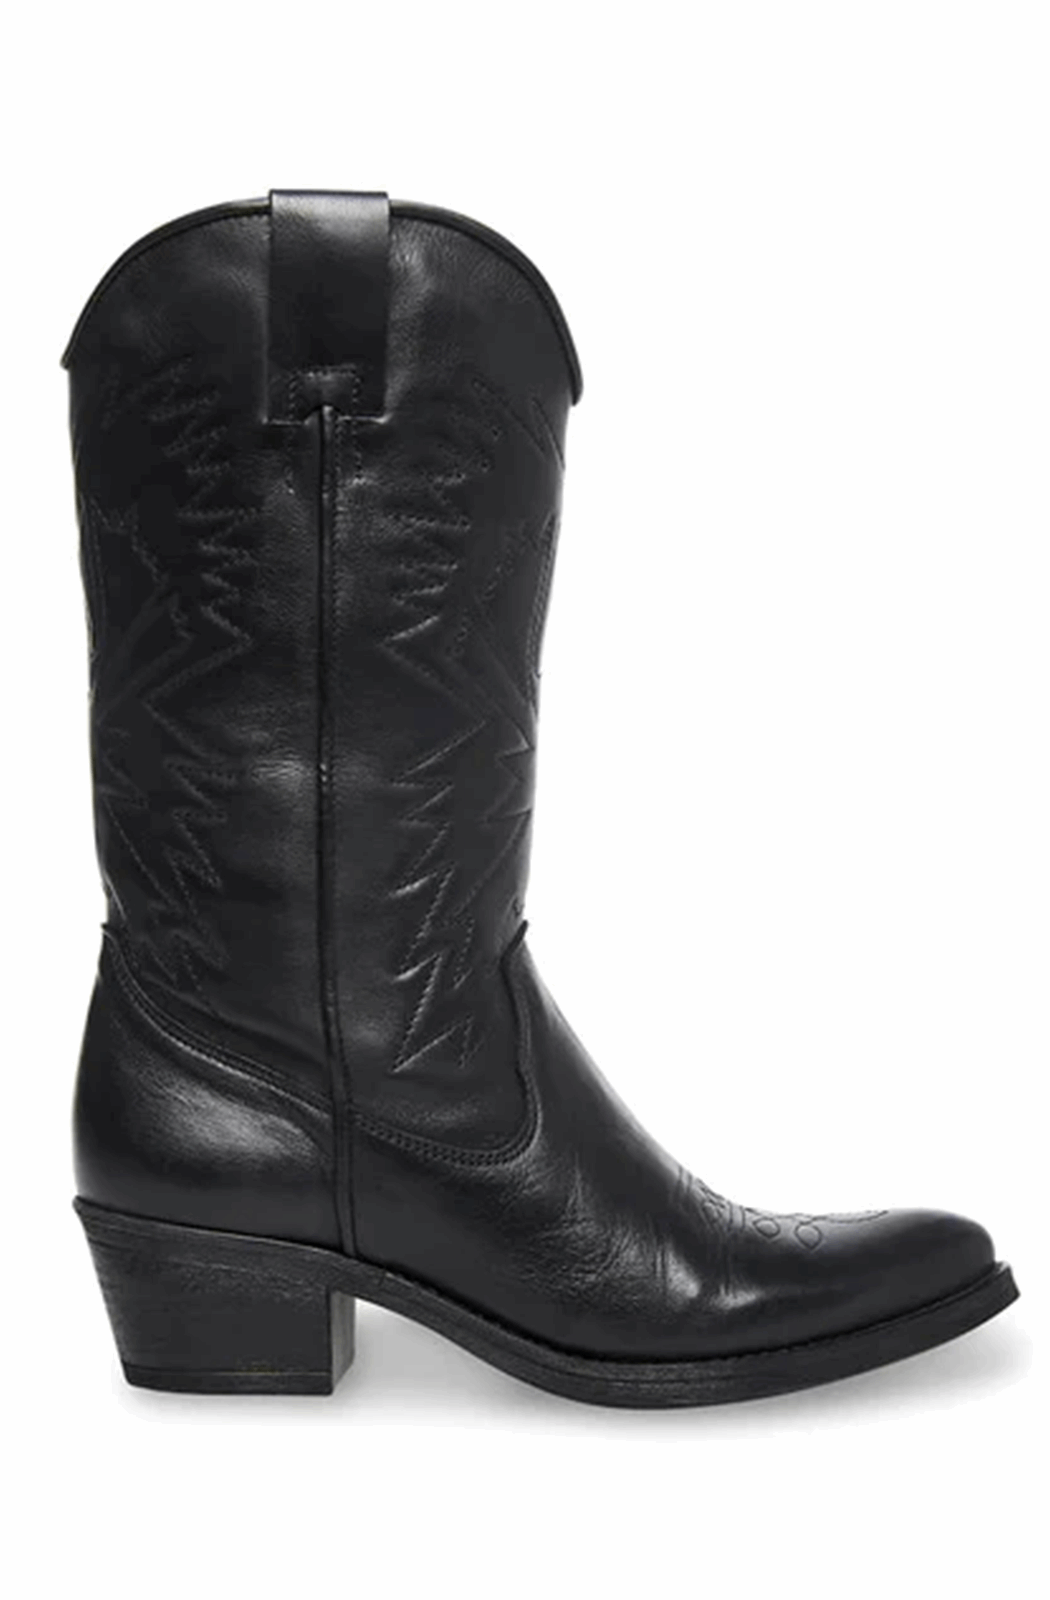 Black western boots